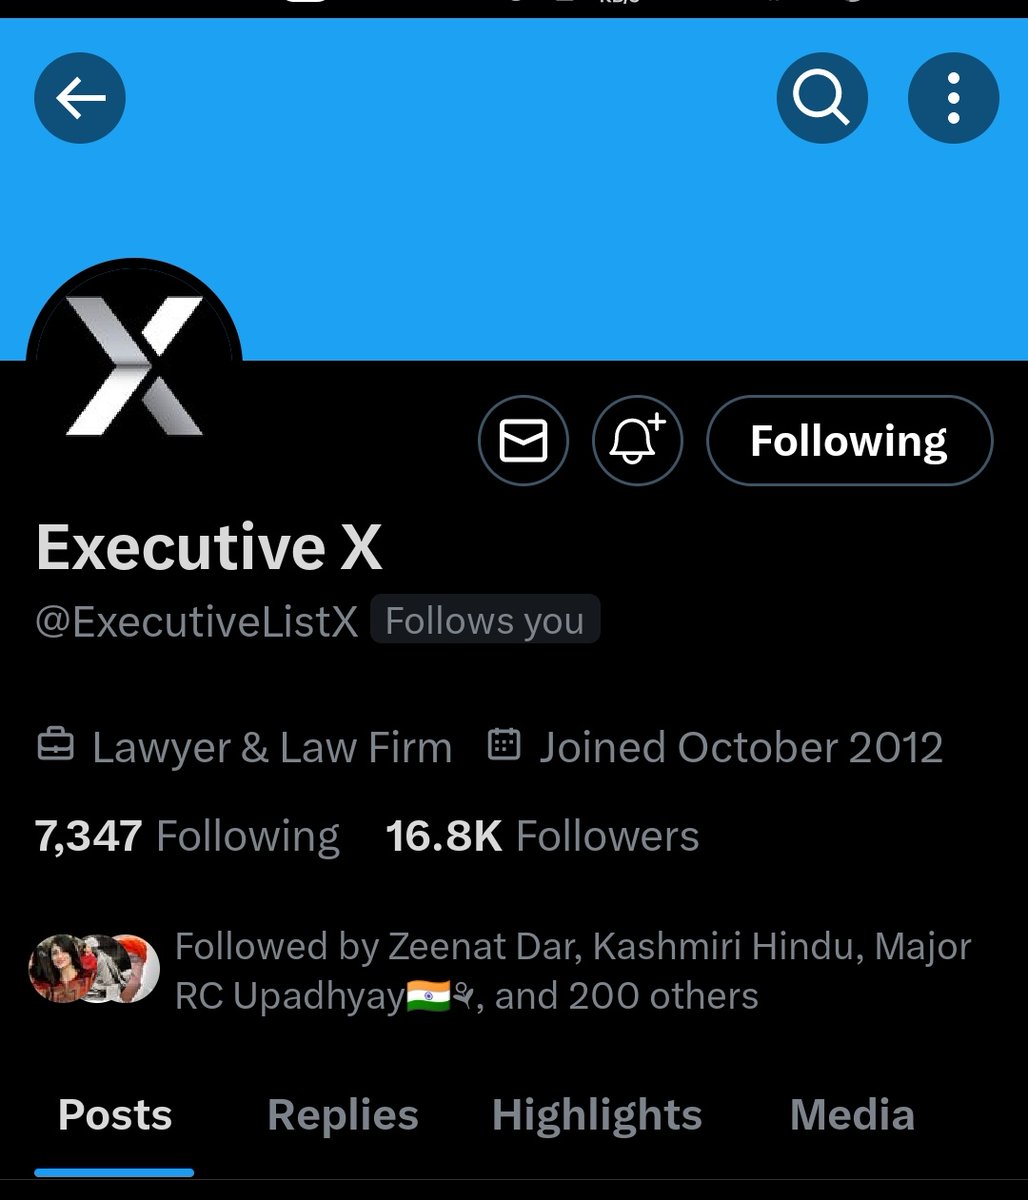 Adv. Raghav Awasthi's account has been hacked with the same malicious link. Please do not click on such links. If you have violated any rules, your account will be suspended without such notices. Do not panic with such messages.